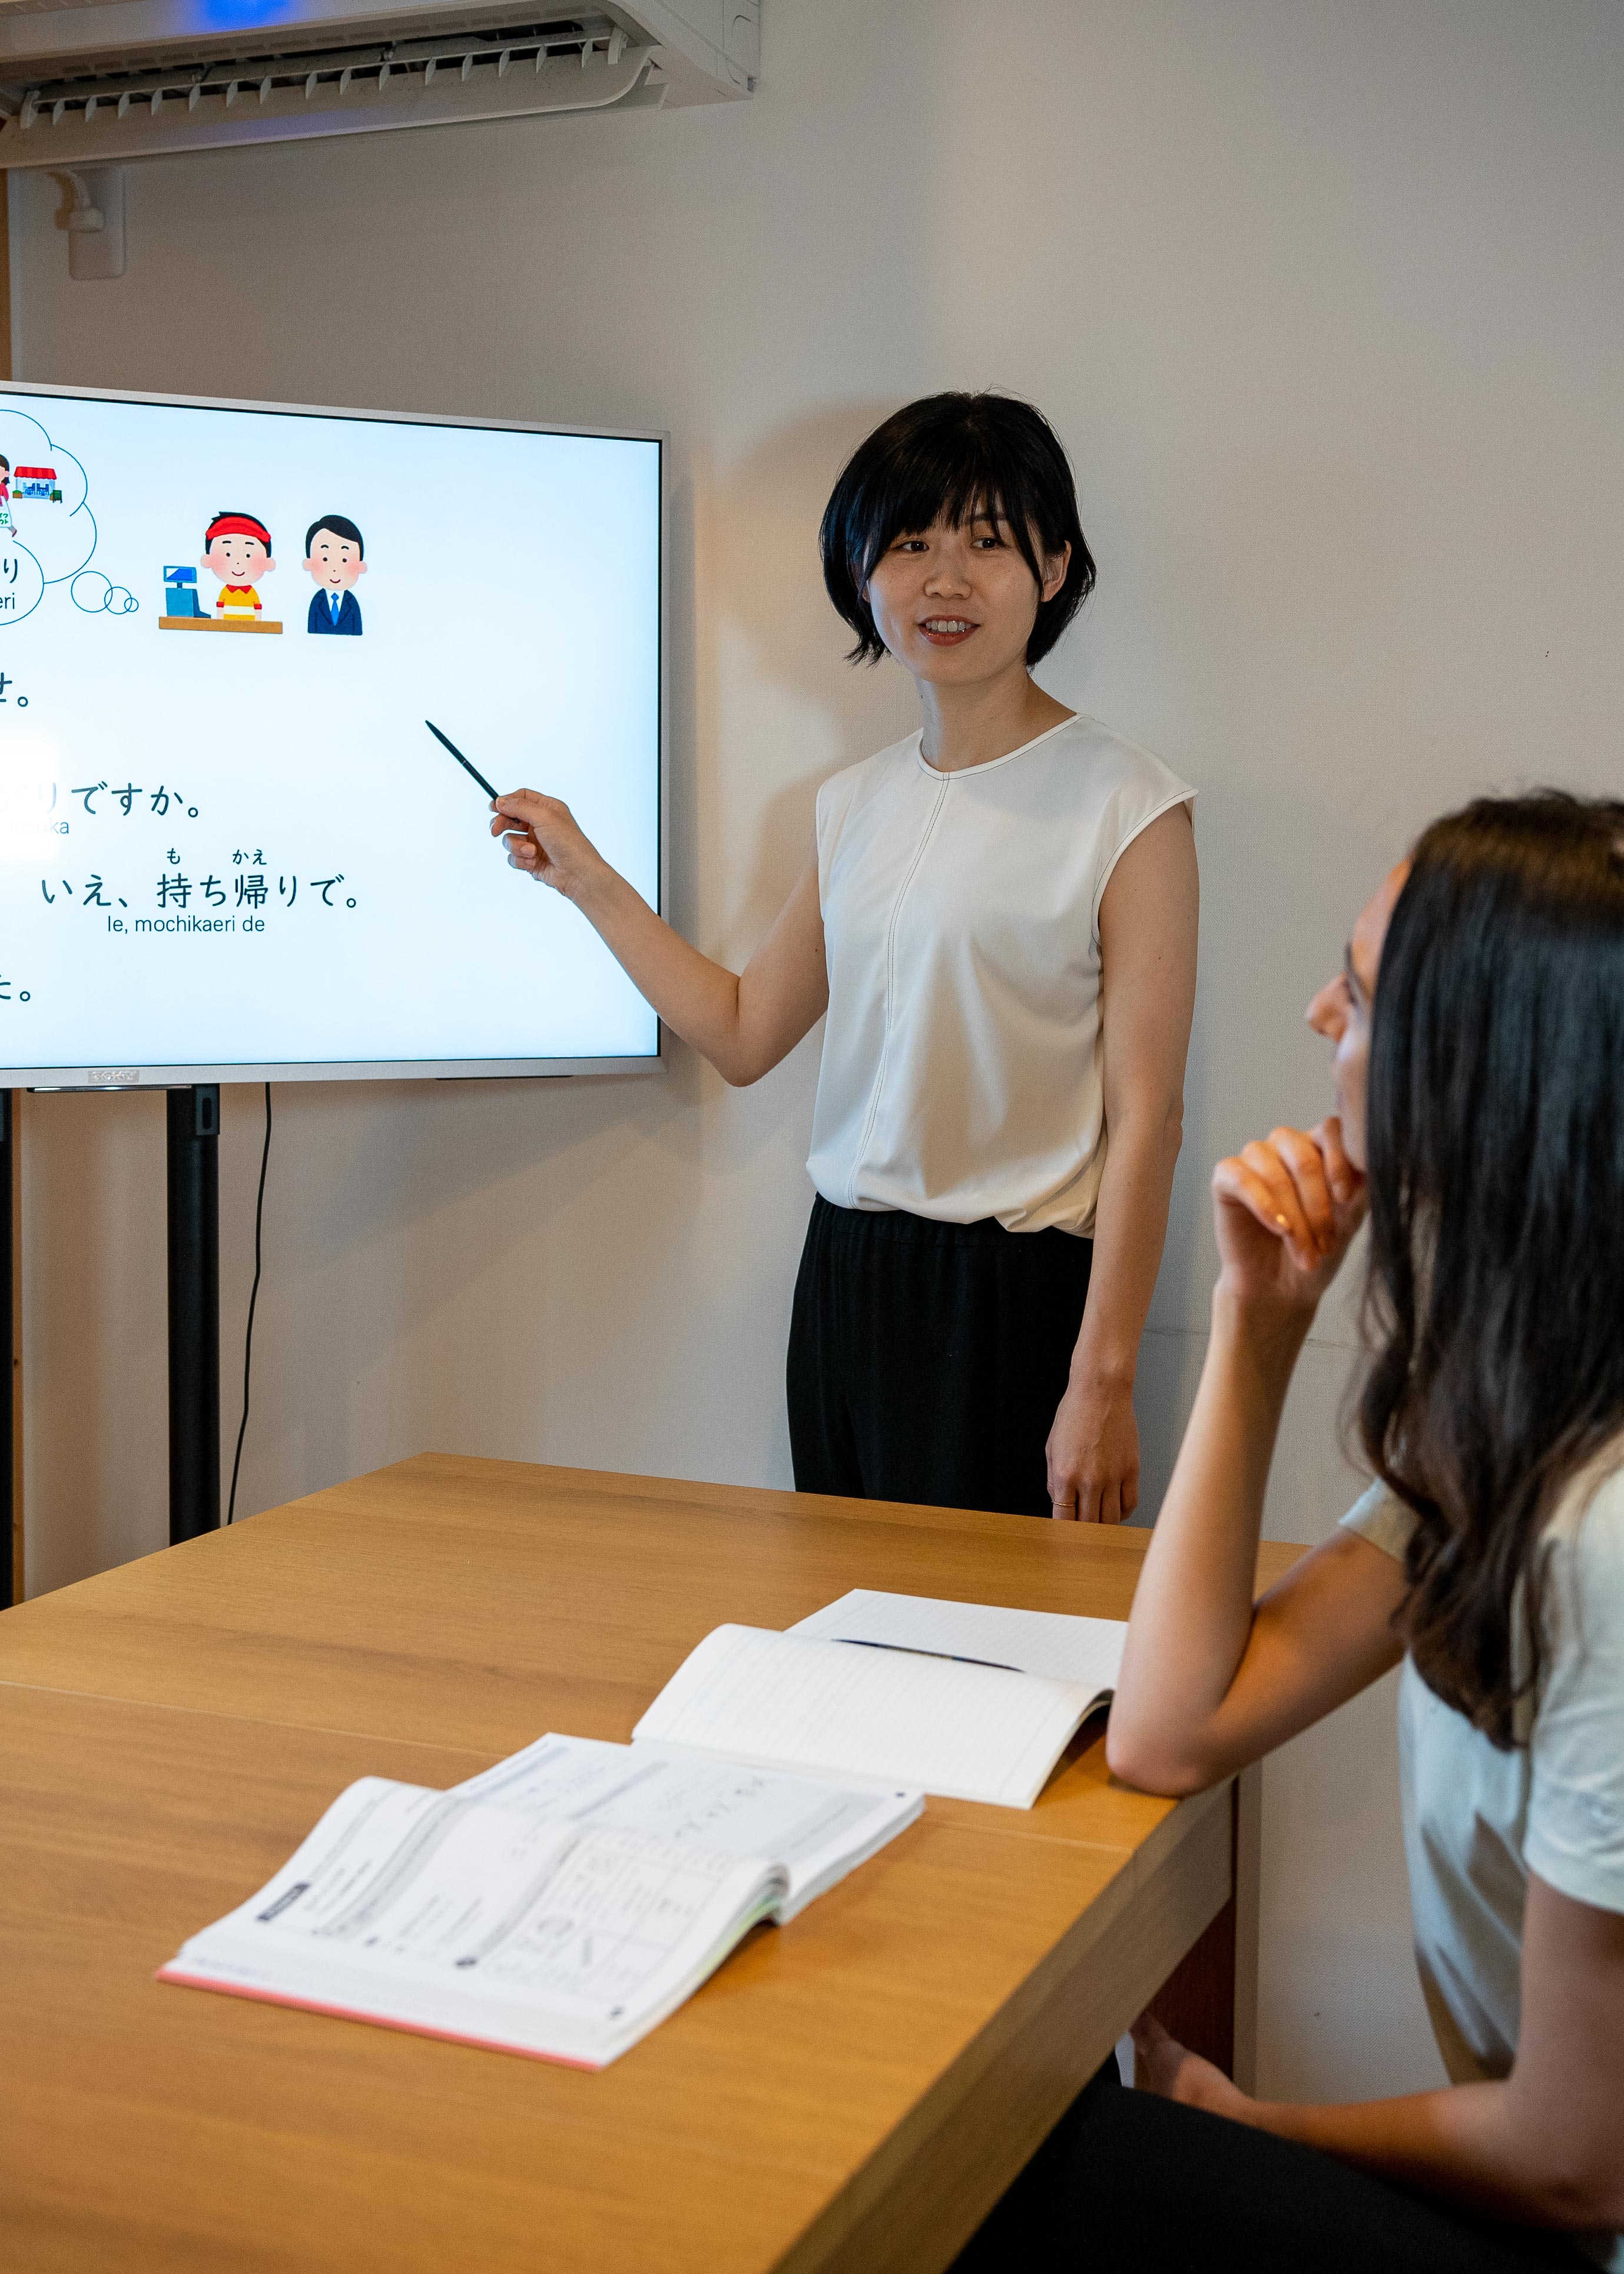 Students are watching the whiteboard to learn Japanese lessons